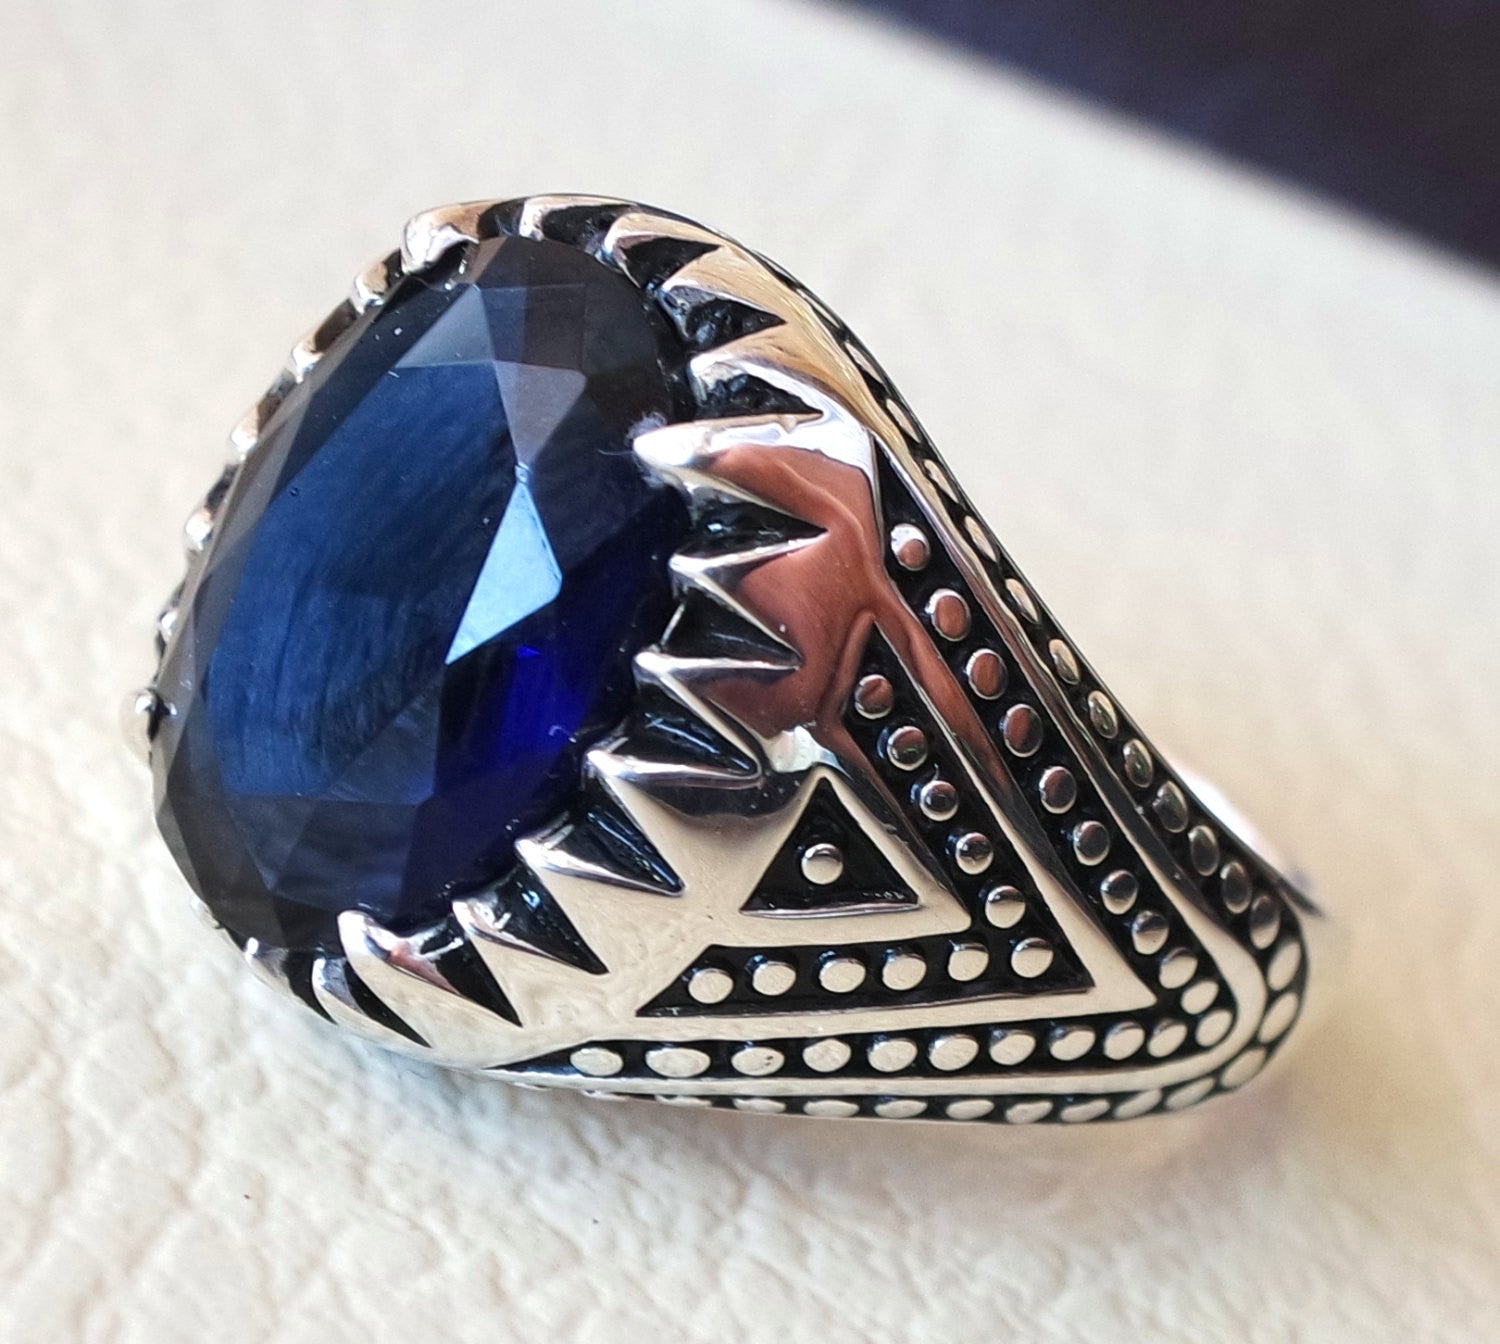 Chimoda Sterling Silver Rings for Men with Onyx, Turquoise and Blue Zircon  Stone Options, Handmade Mens Jewelry Ring, Striped Motif Mens Ring  (BlueCZ_11)|Amazon.com